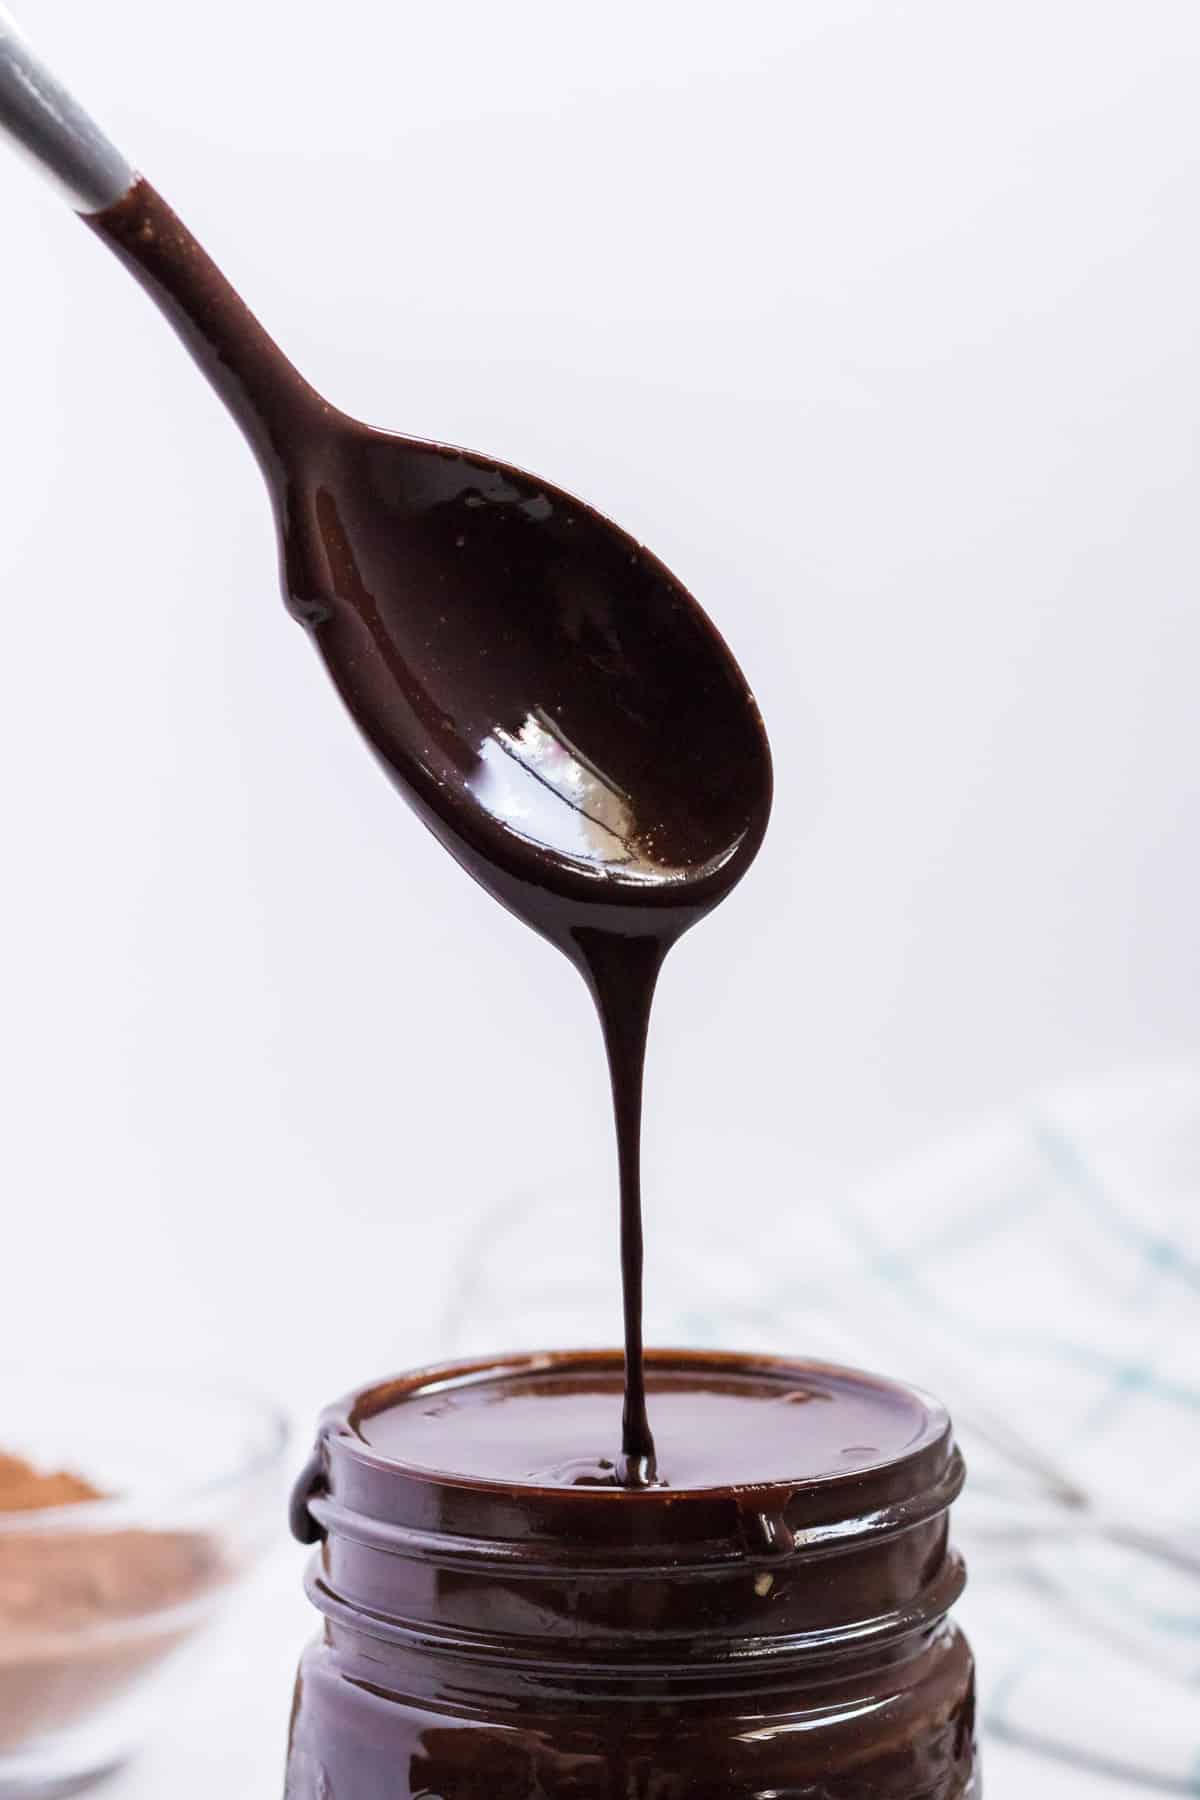 chocolate syrup dripping off a spoon